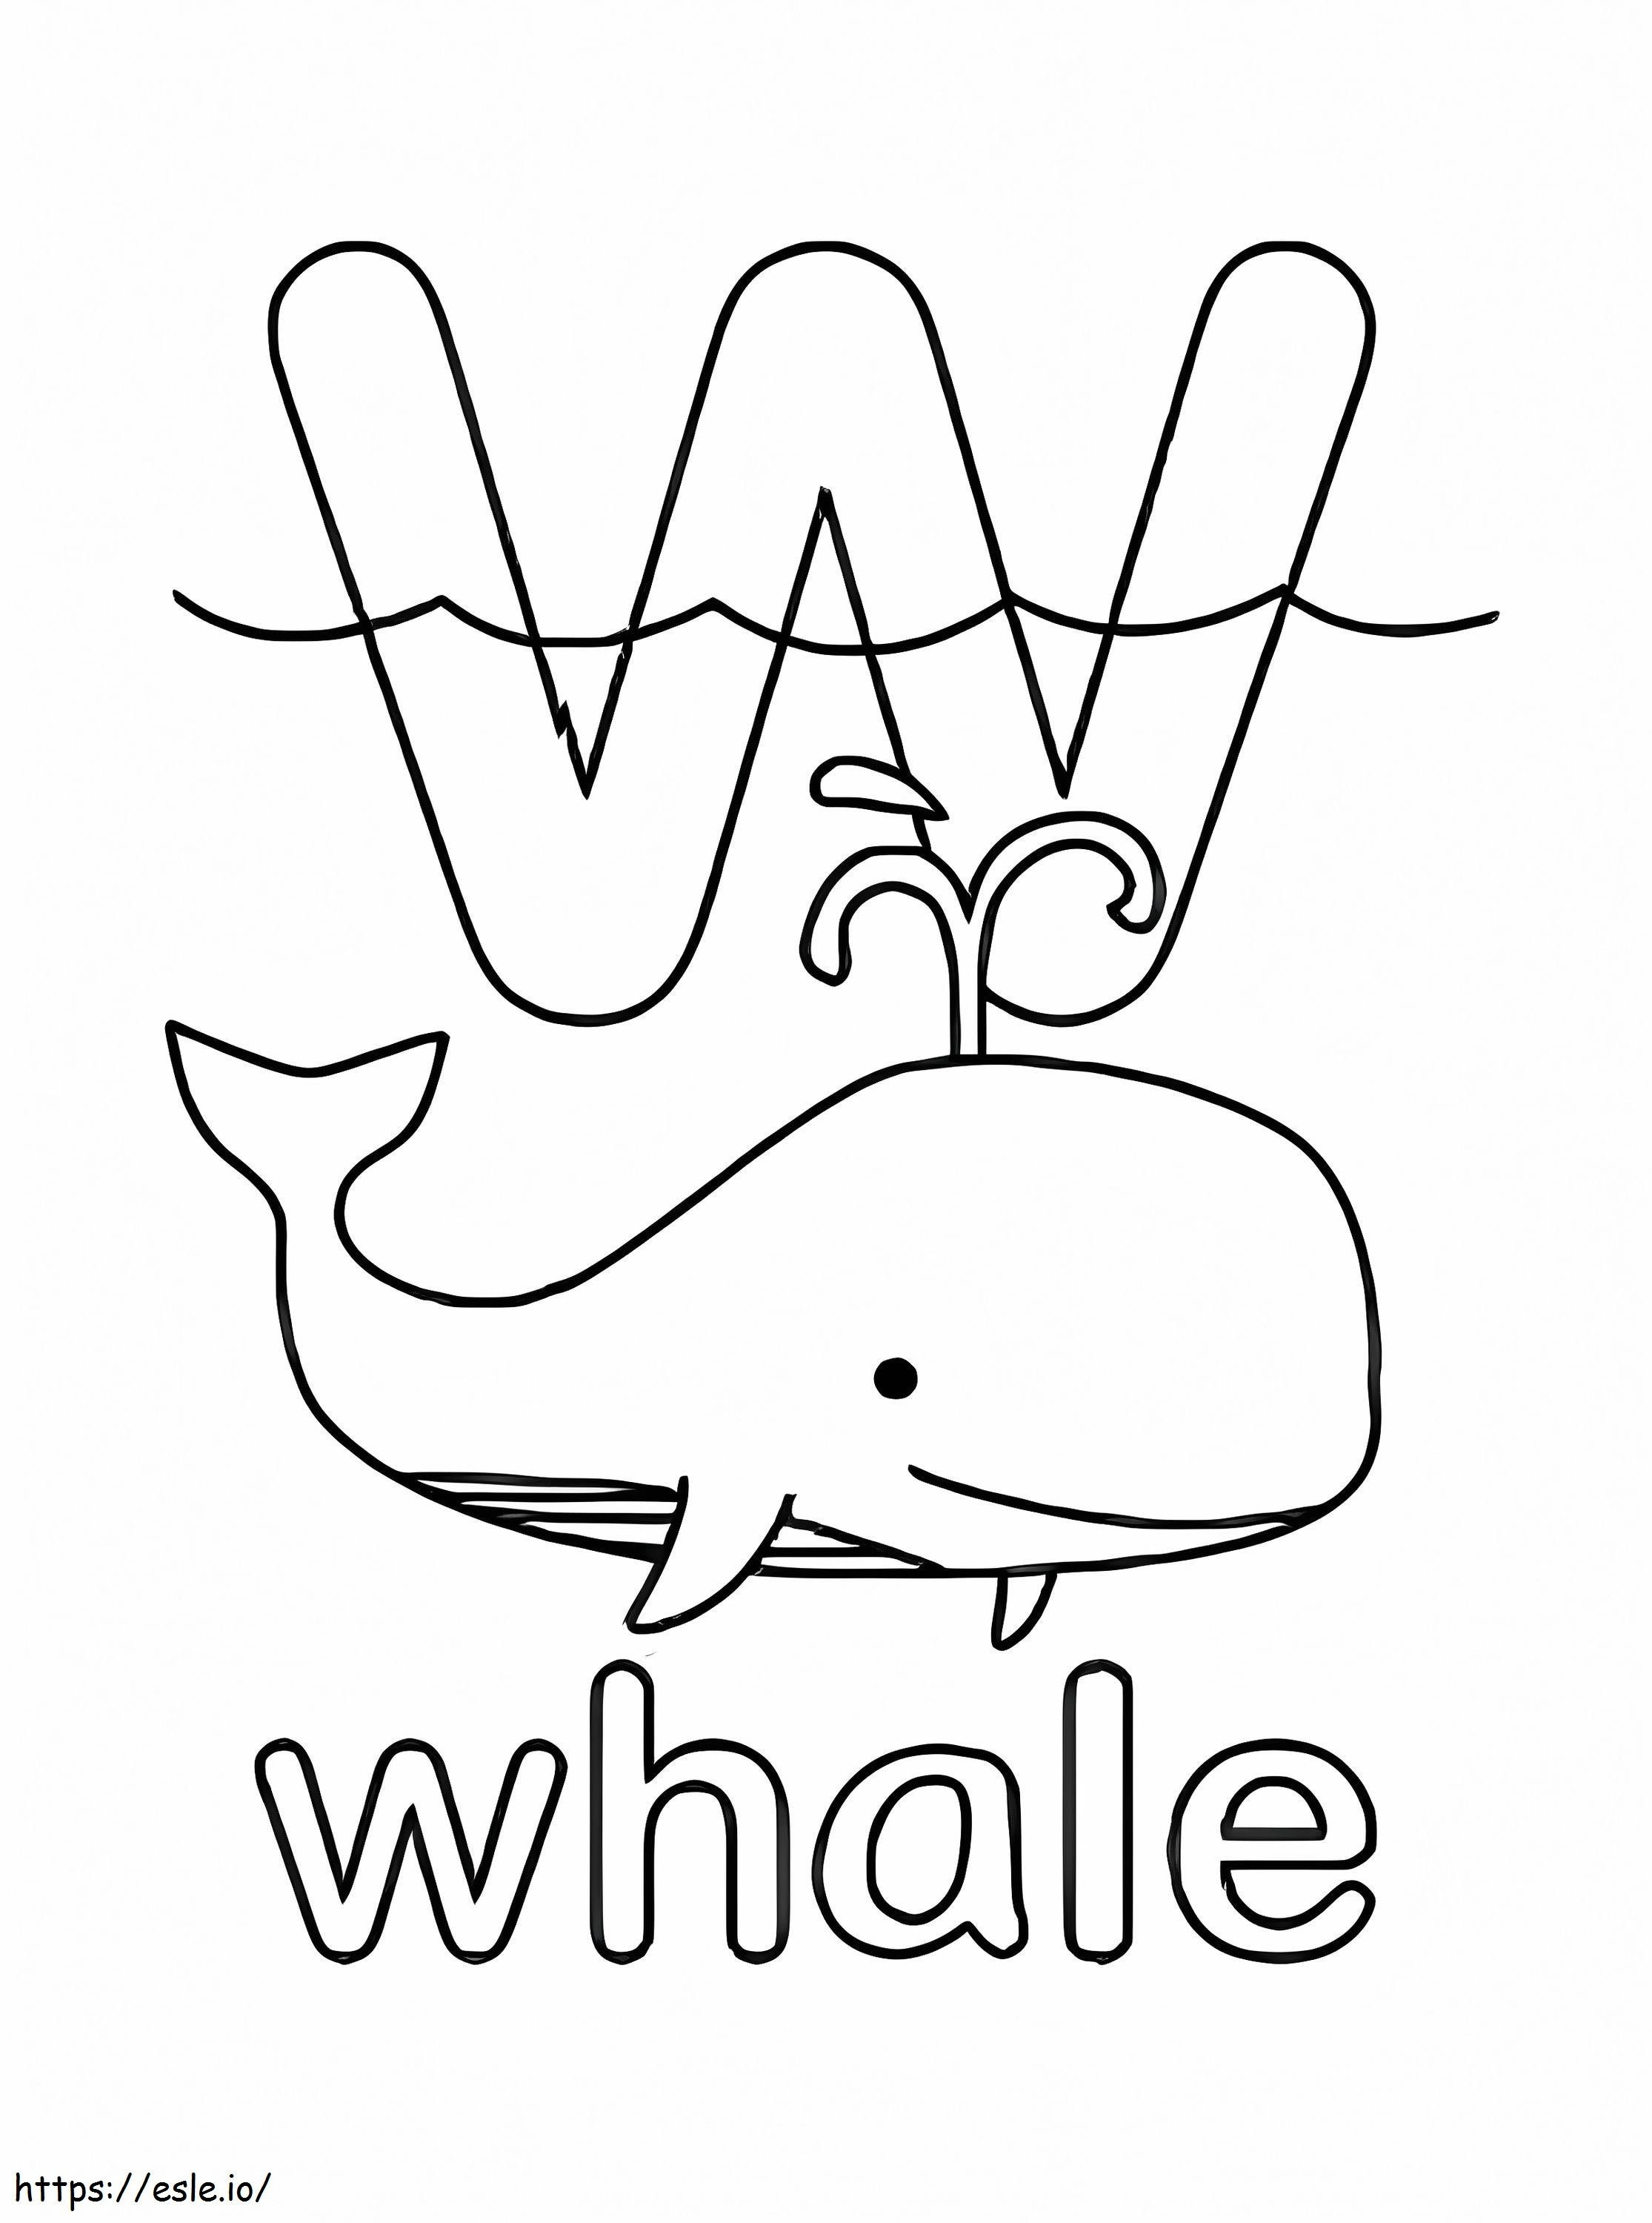 Whale swimming letter w coloring page